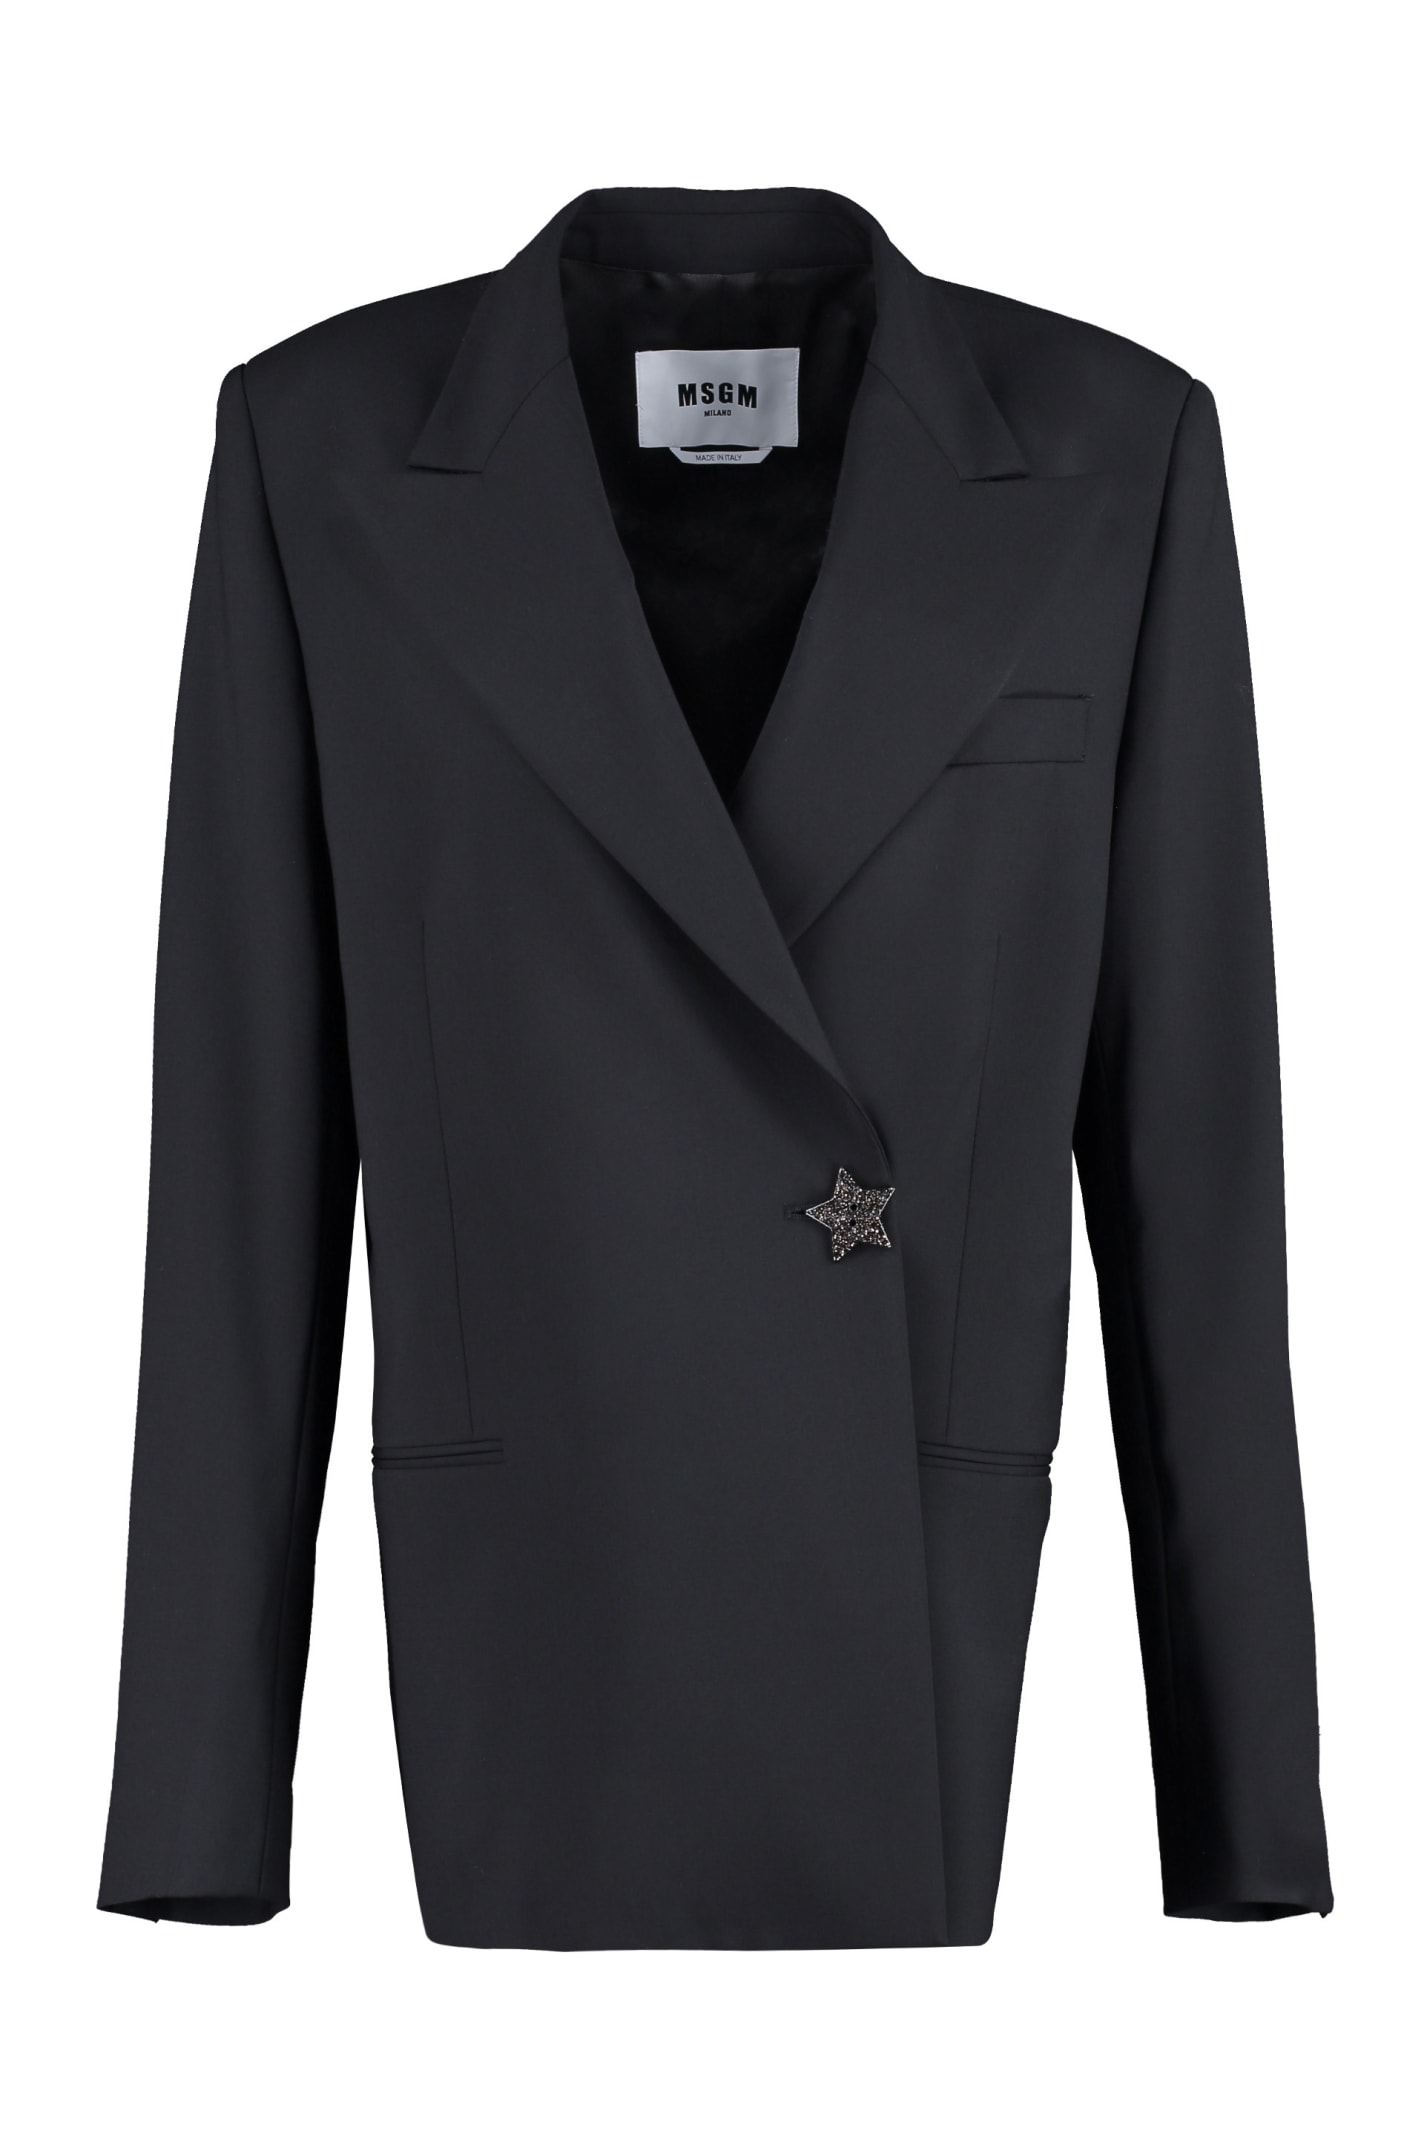 MSGM Double-breasted Wool Blazer